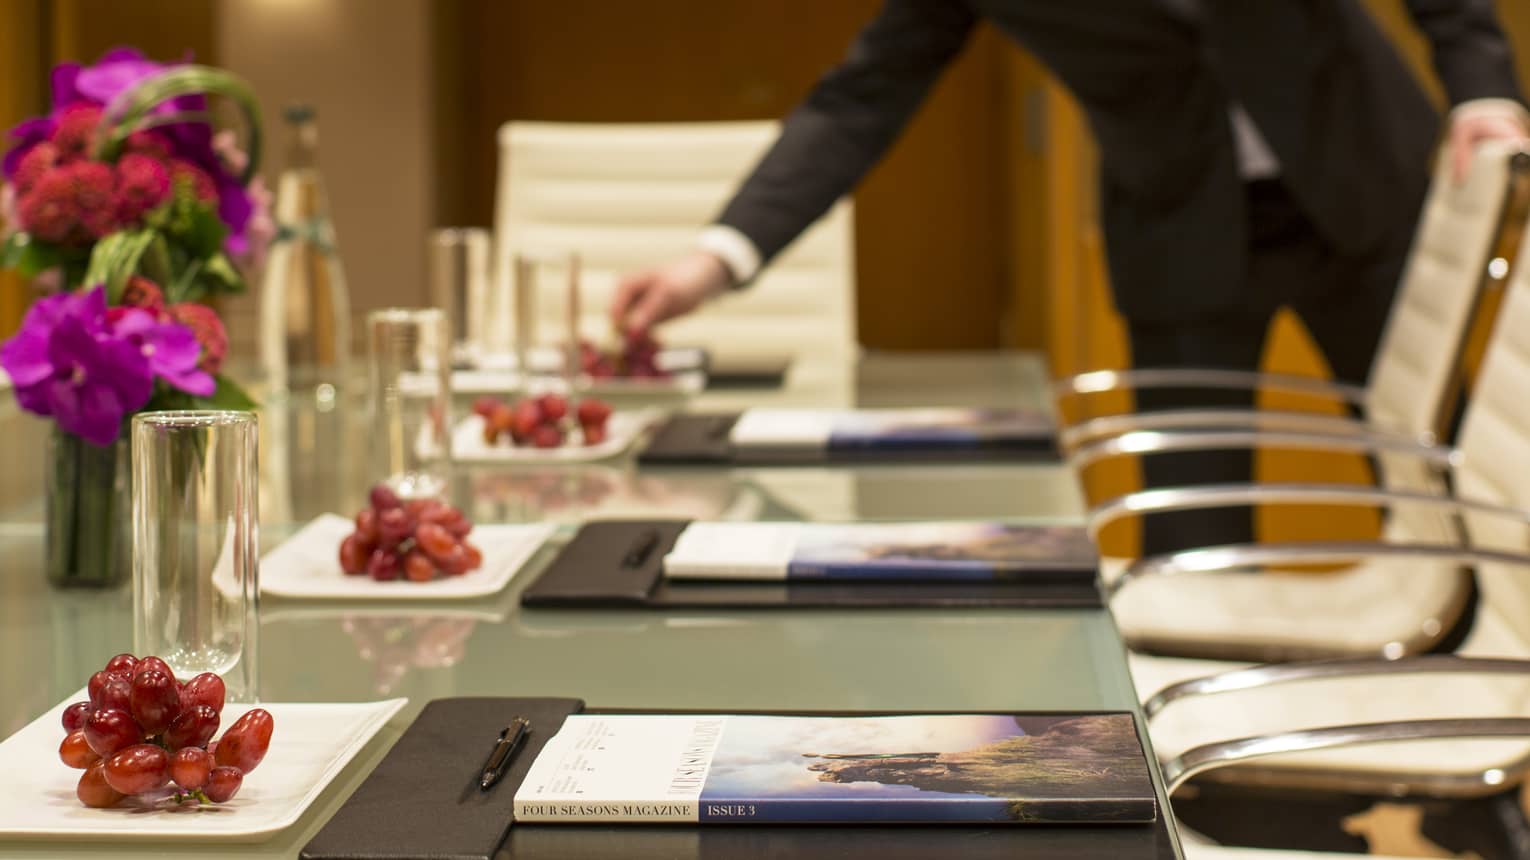 Boardroom meeting table, man wearing suit reaches for red grapes on plate